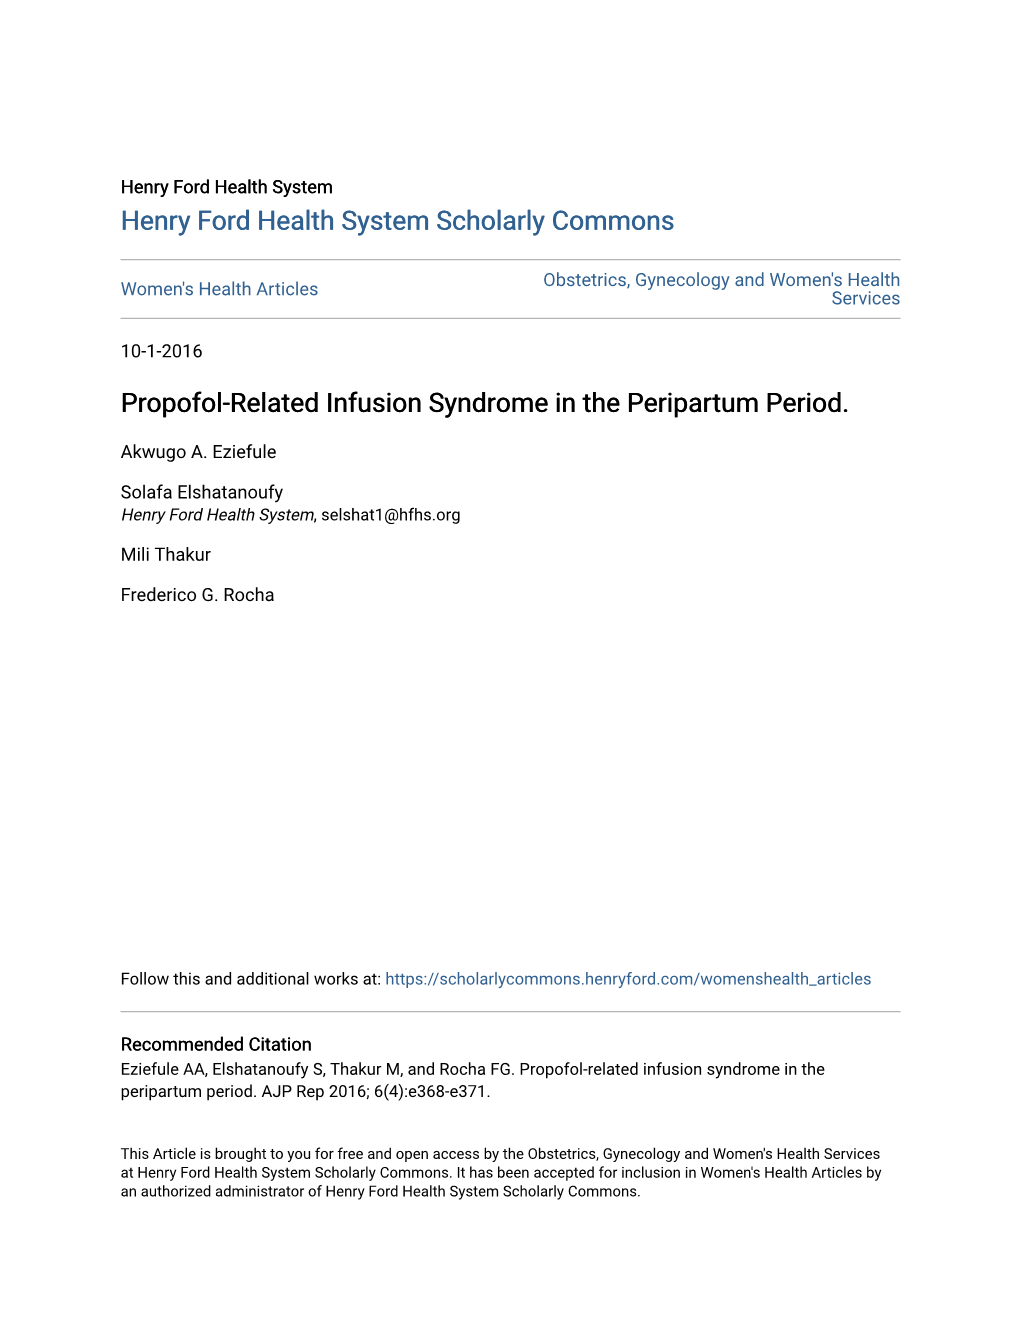 Propofol-Related Infusion Syndrome in the Peripartum Period